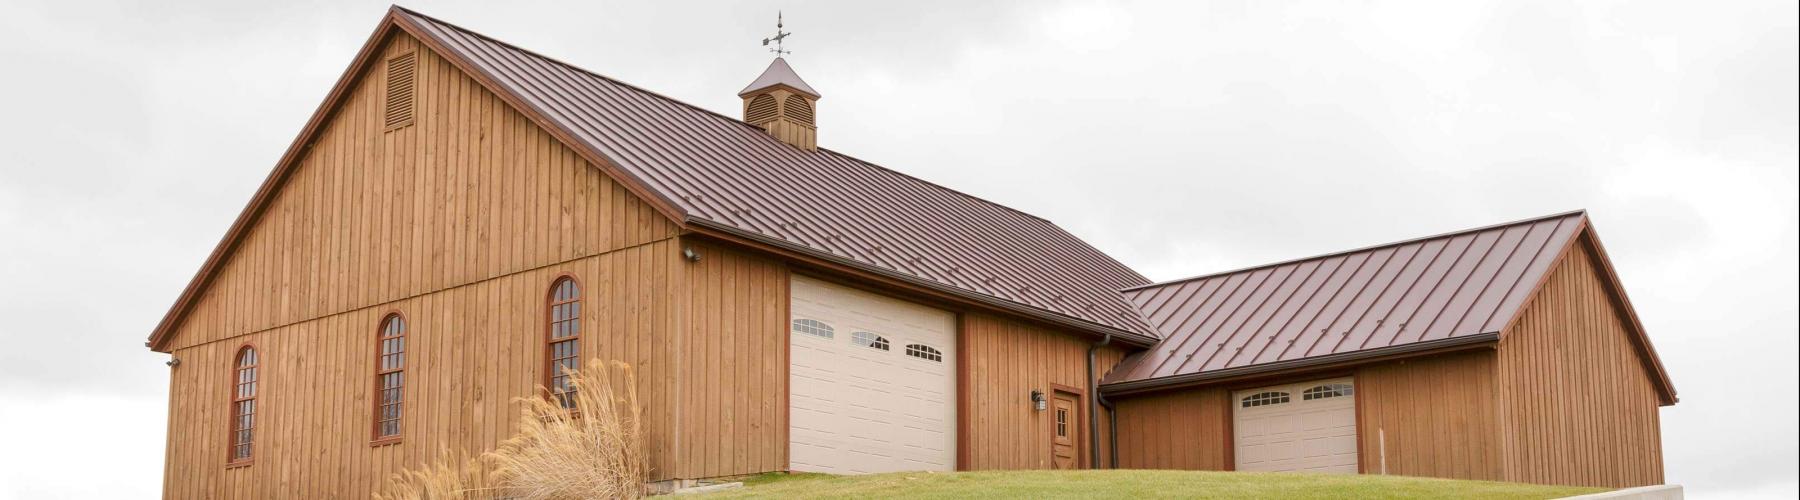 Stable Hollow Construction built this bank barn.